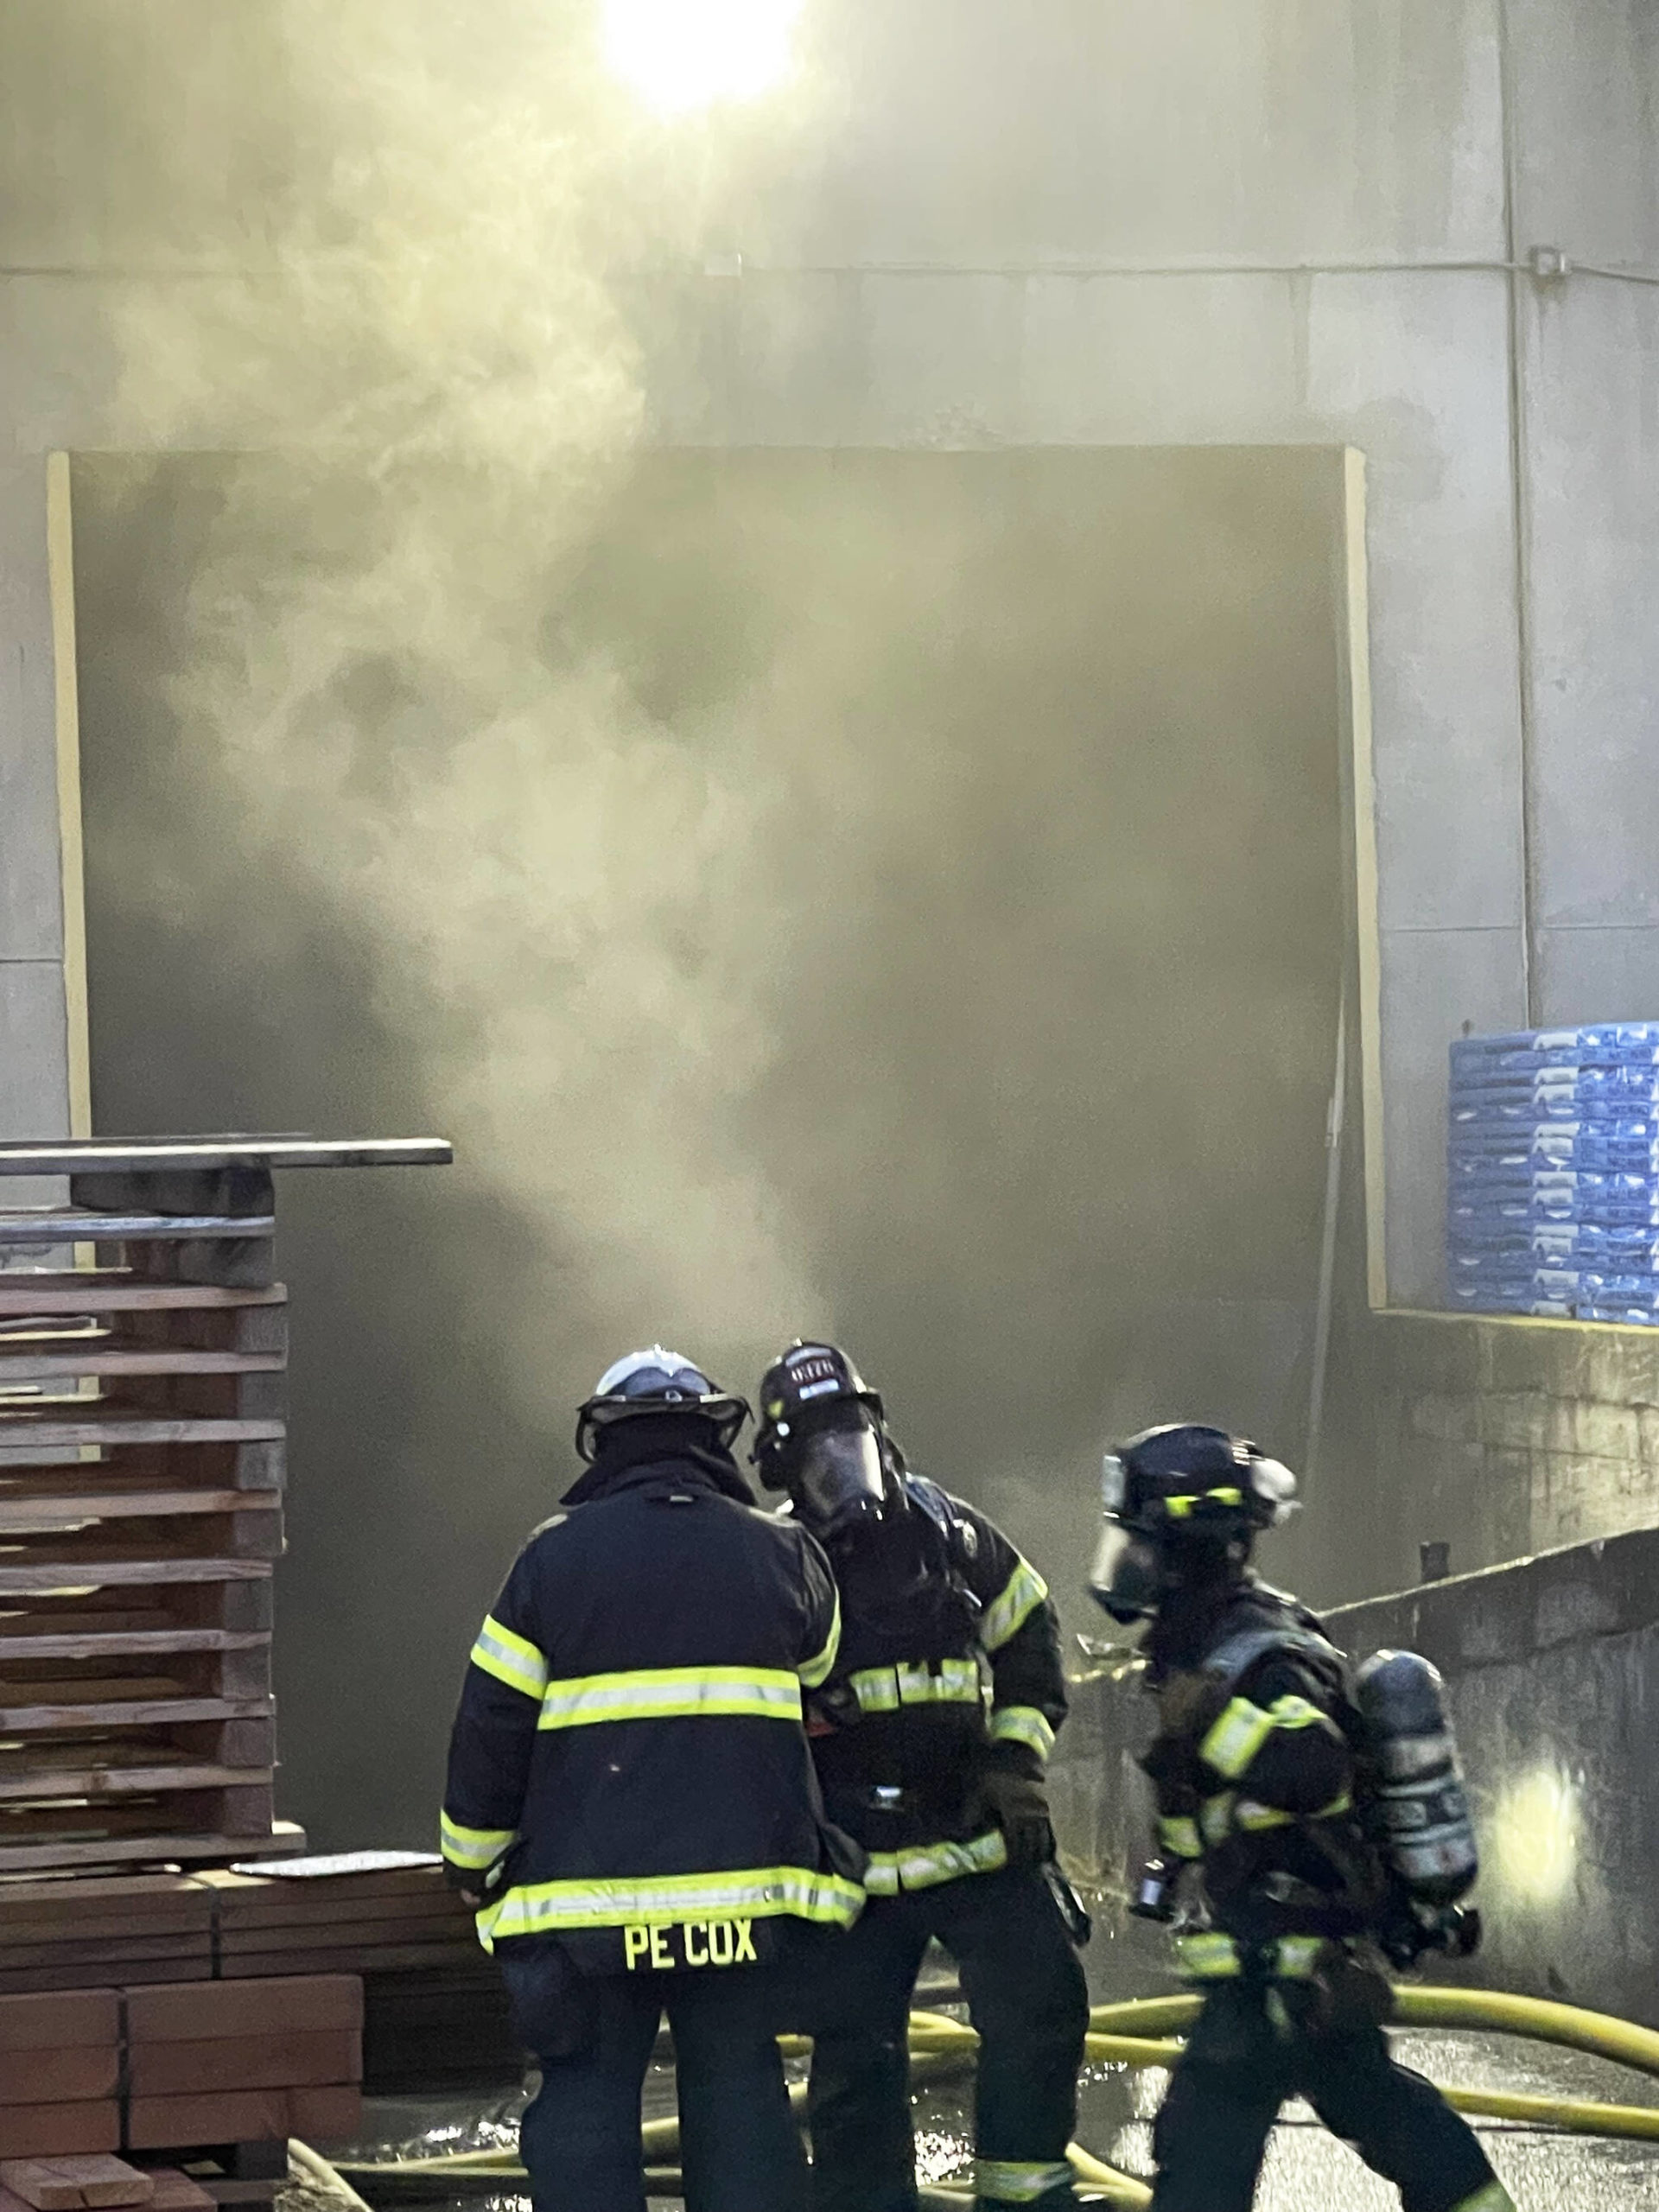 Firefighters battle a blaze July 6 at the Uresco Construction Materials Inc. warehouse, 8246 S. 194th St. COURTESY PHOTO, Puget Sound Fire